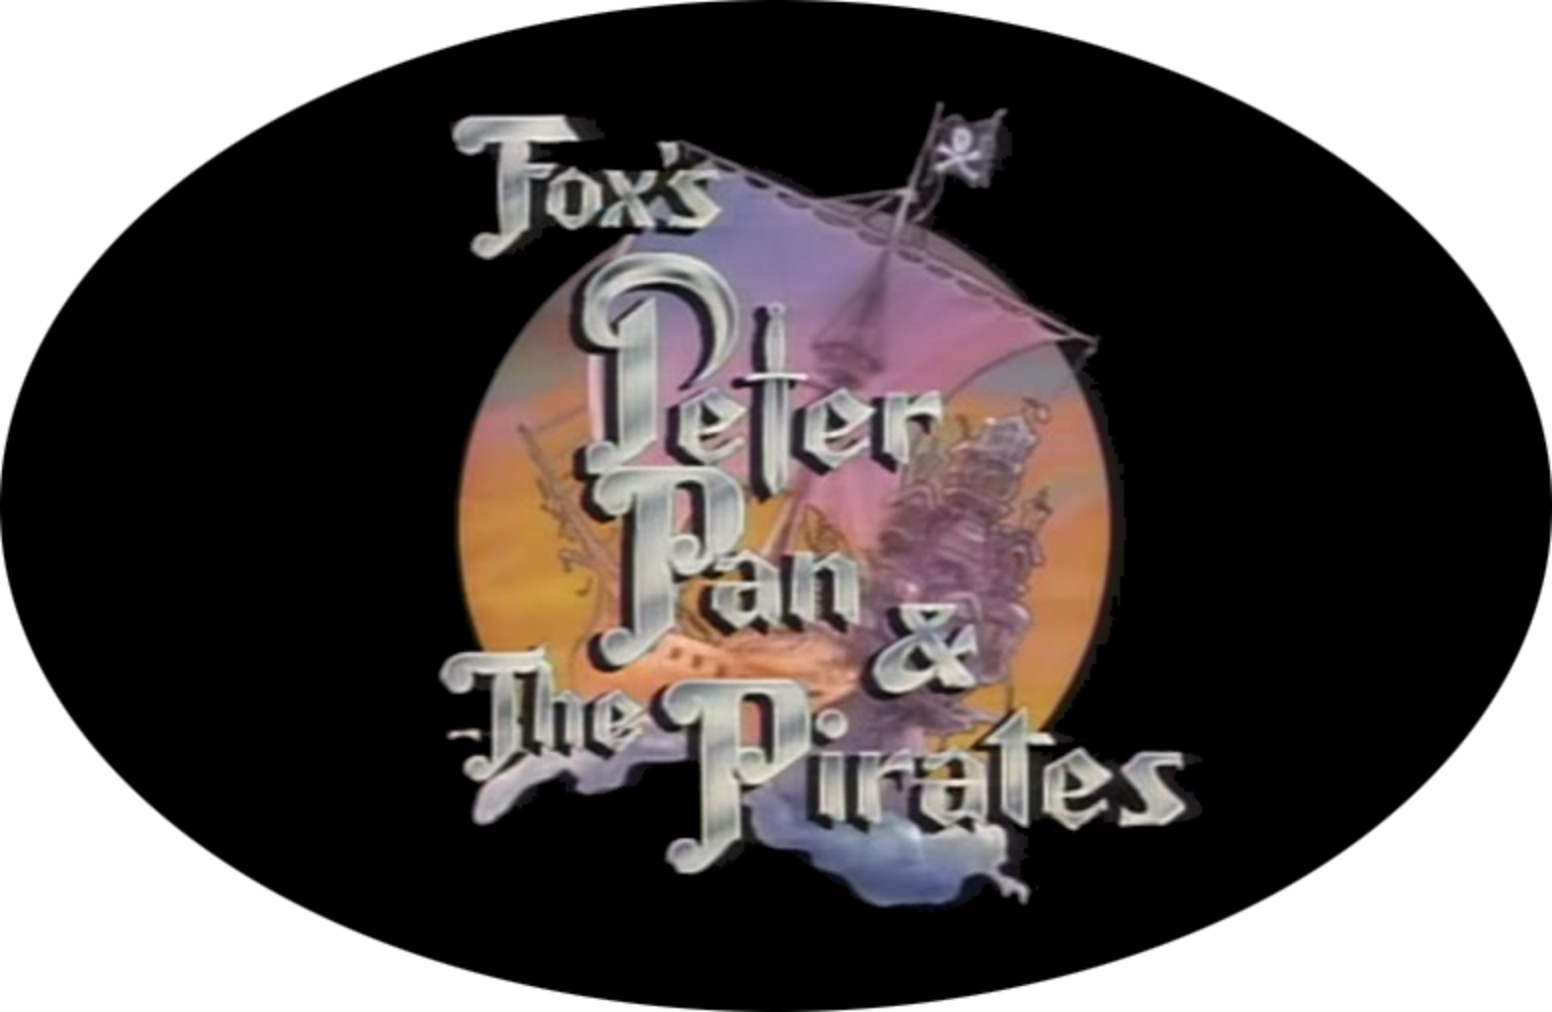 Peter Pan and the Pirates (6 DVDs Box Set)